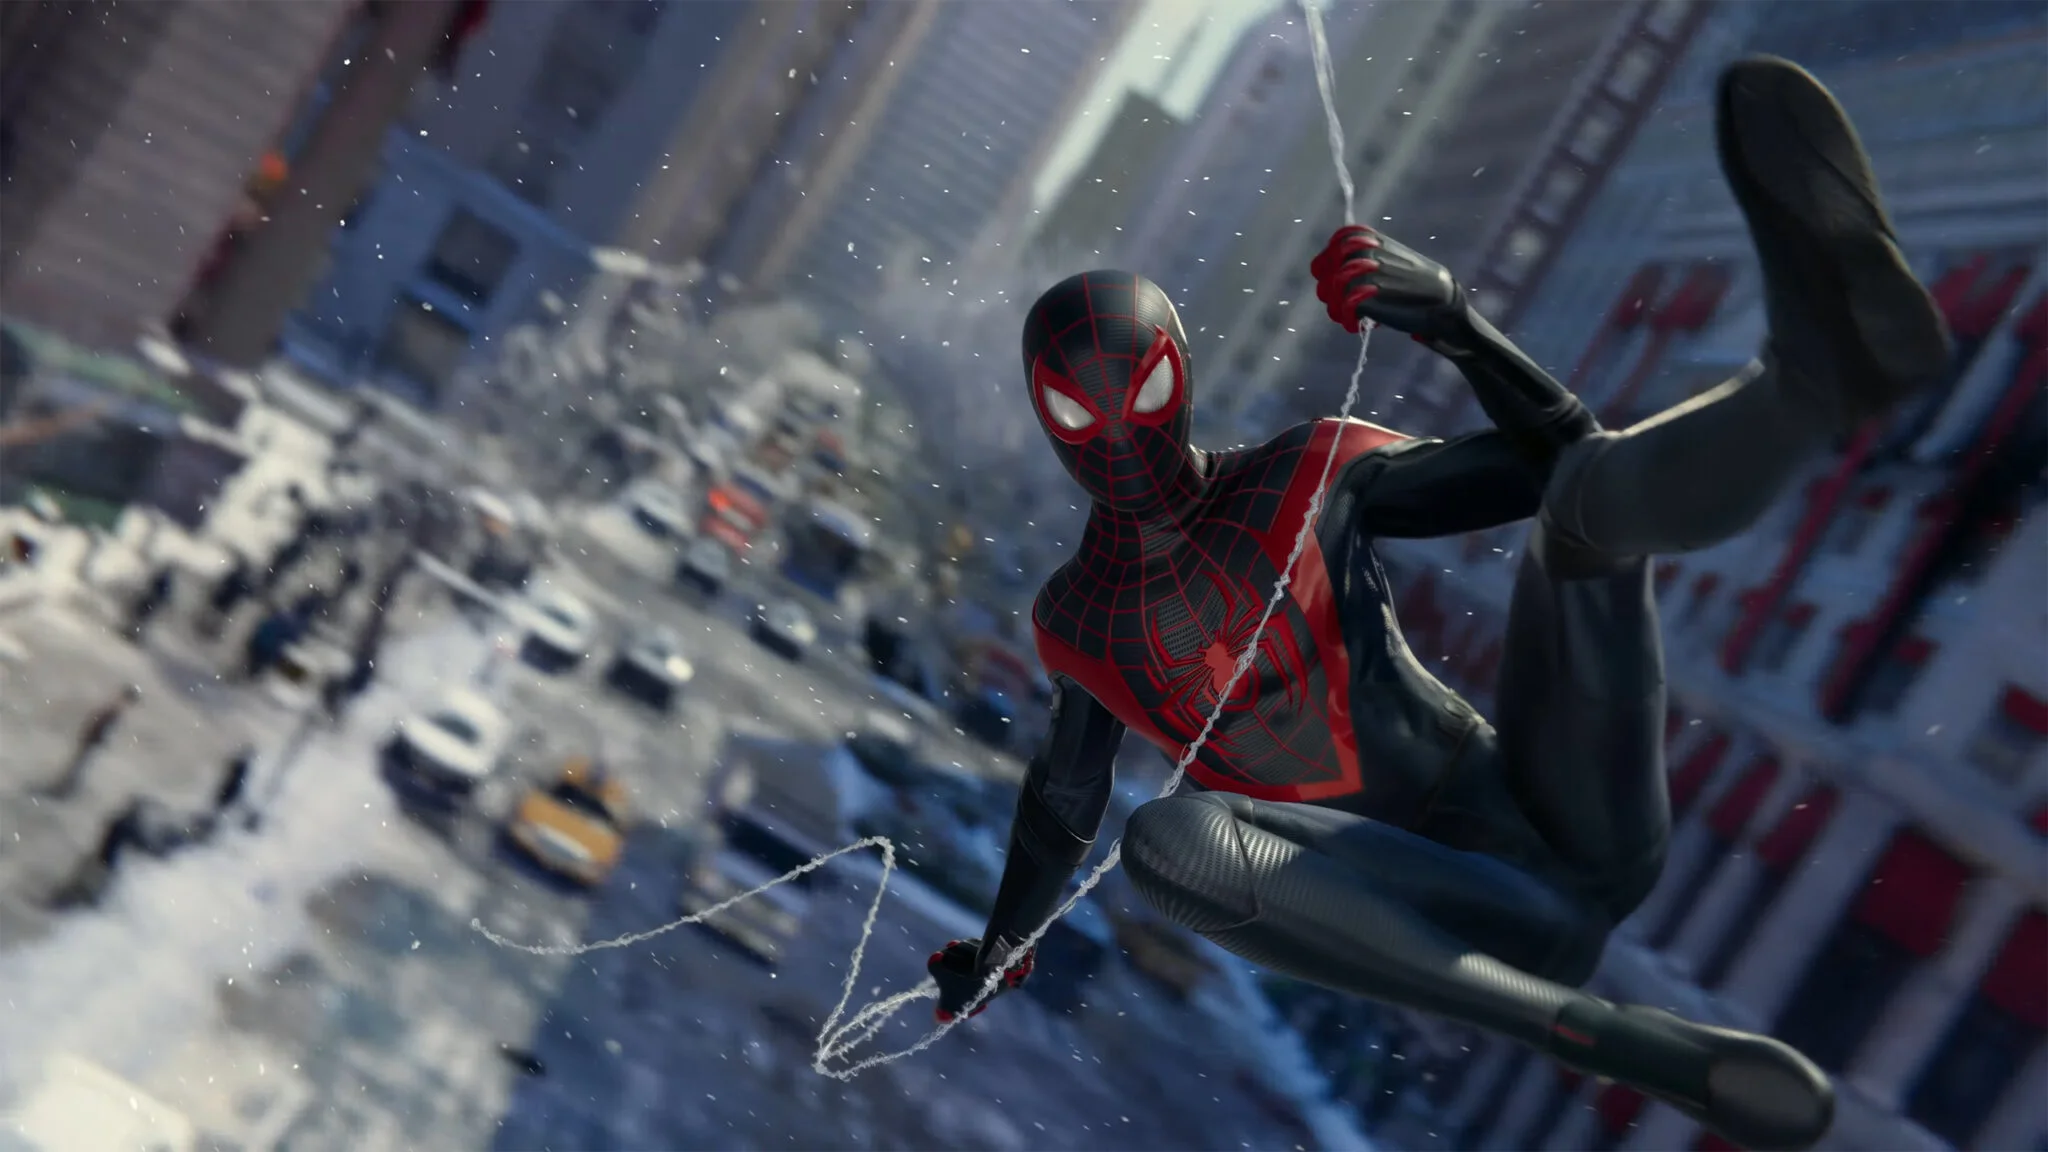 A new gameplay video has been released for the unofficial port of Marvel's Spider-Man 2 for PC